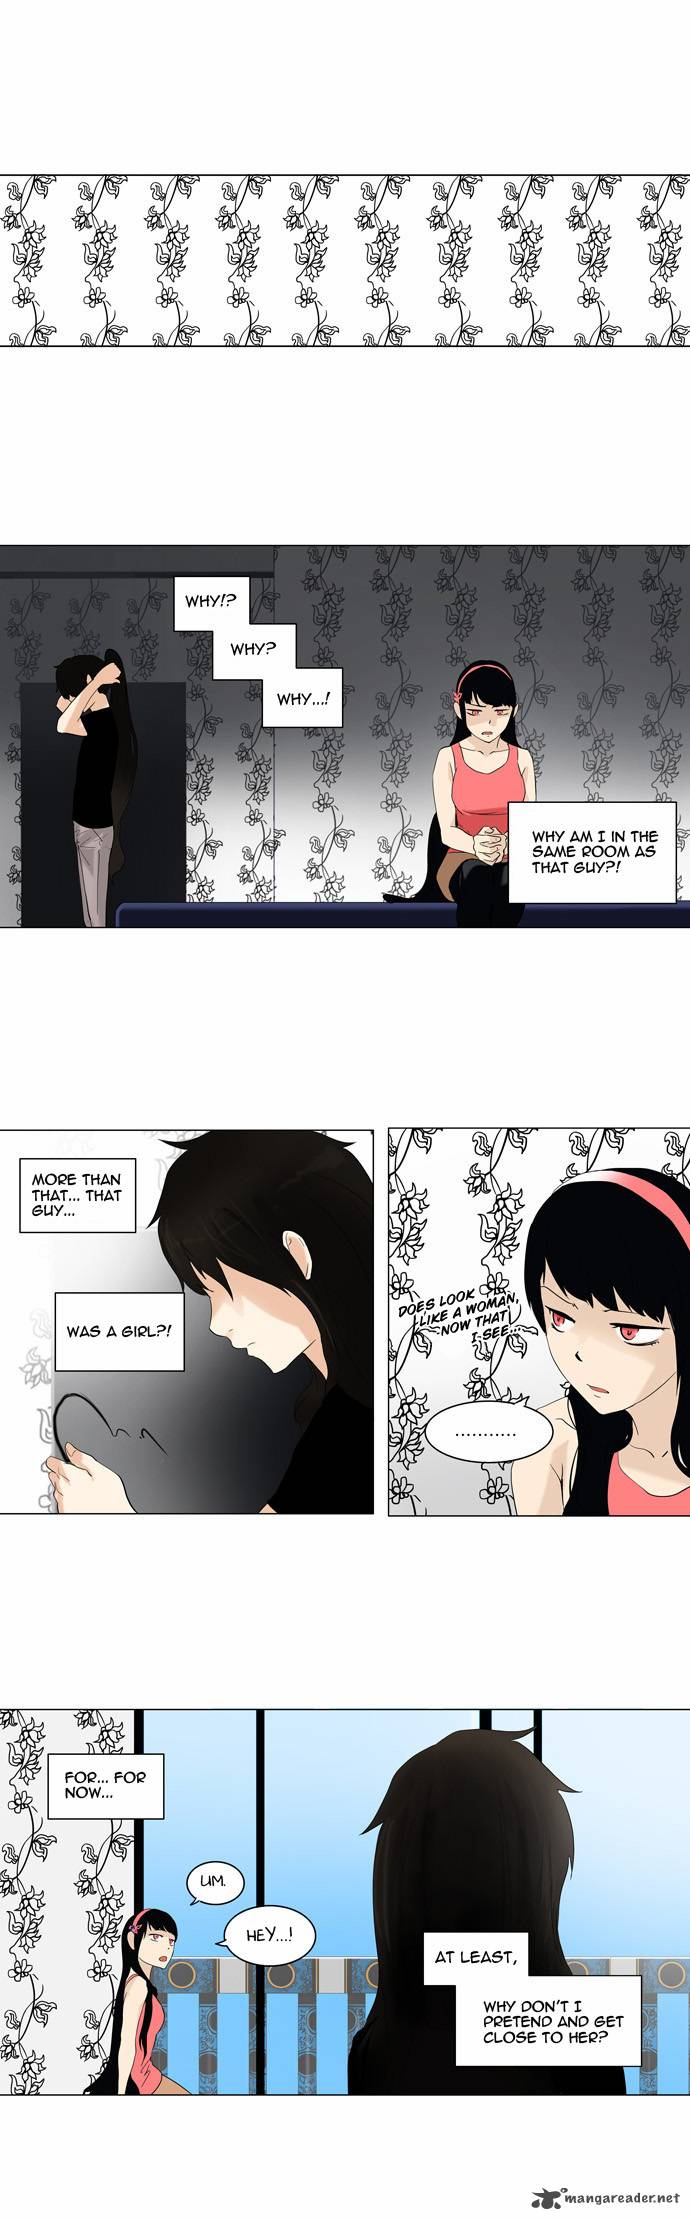 Tower Of God 89 18